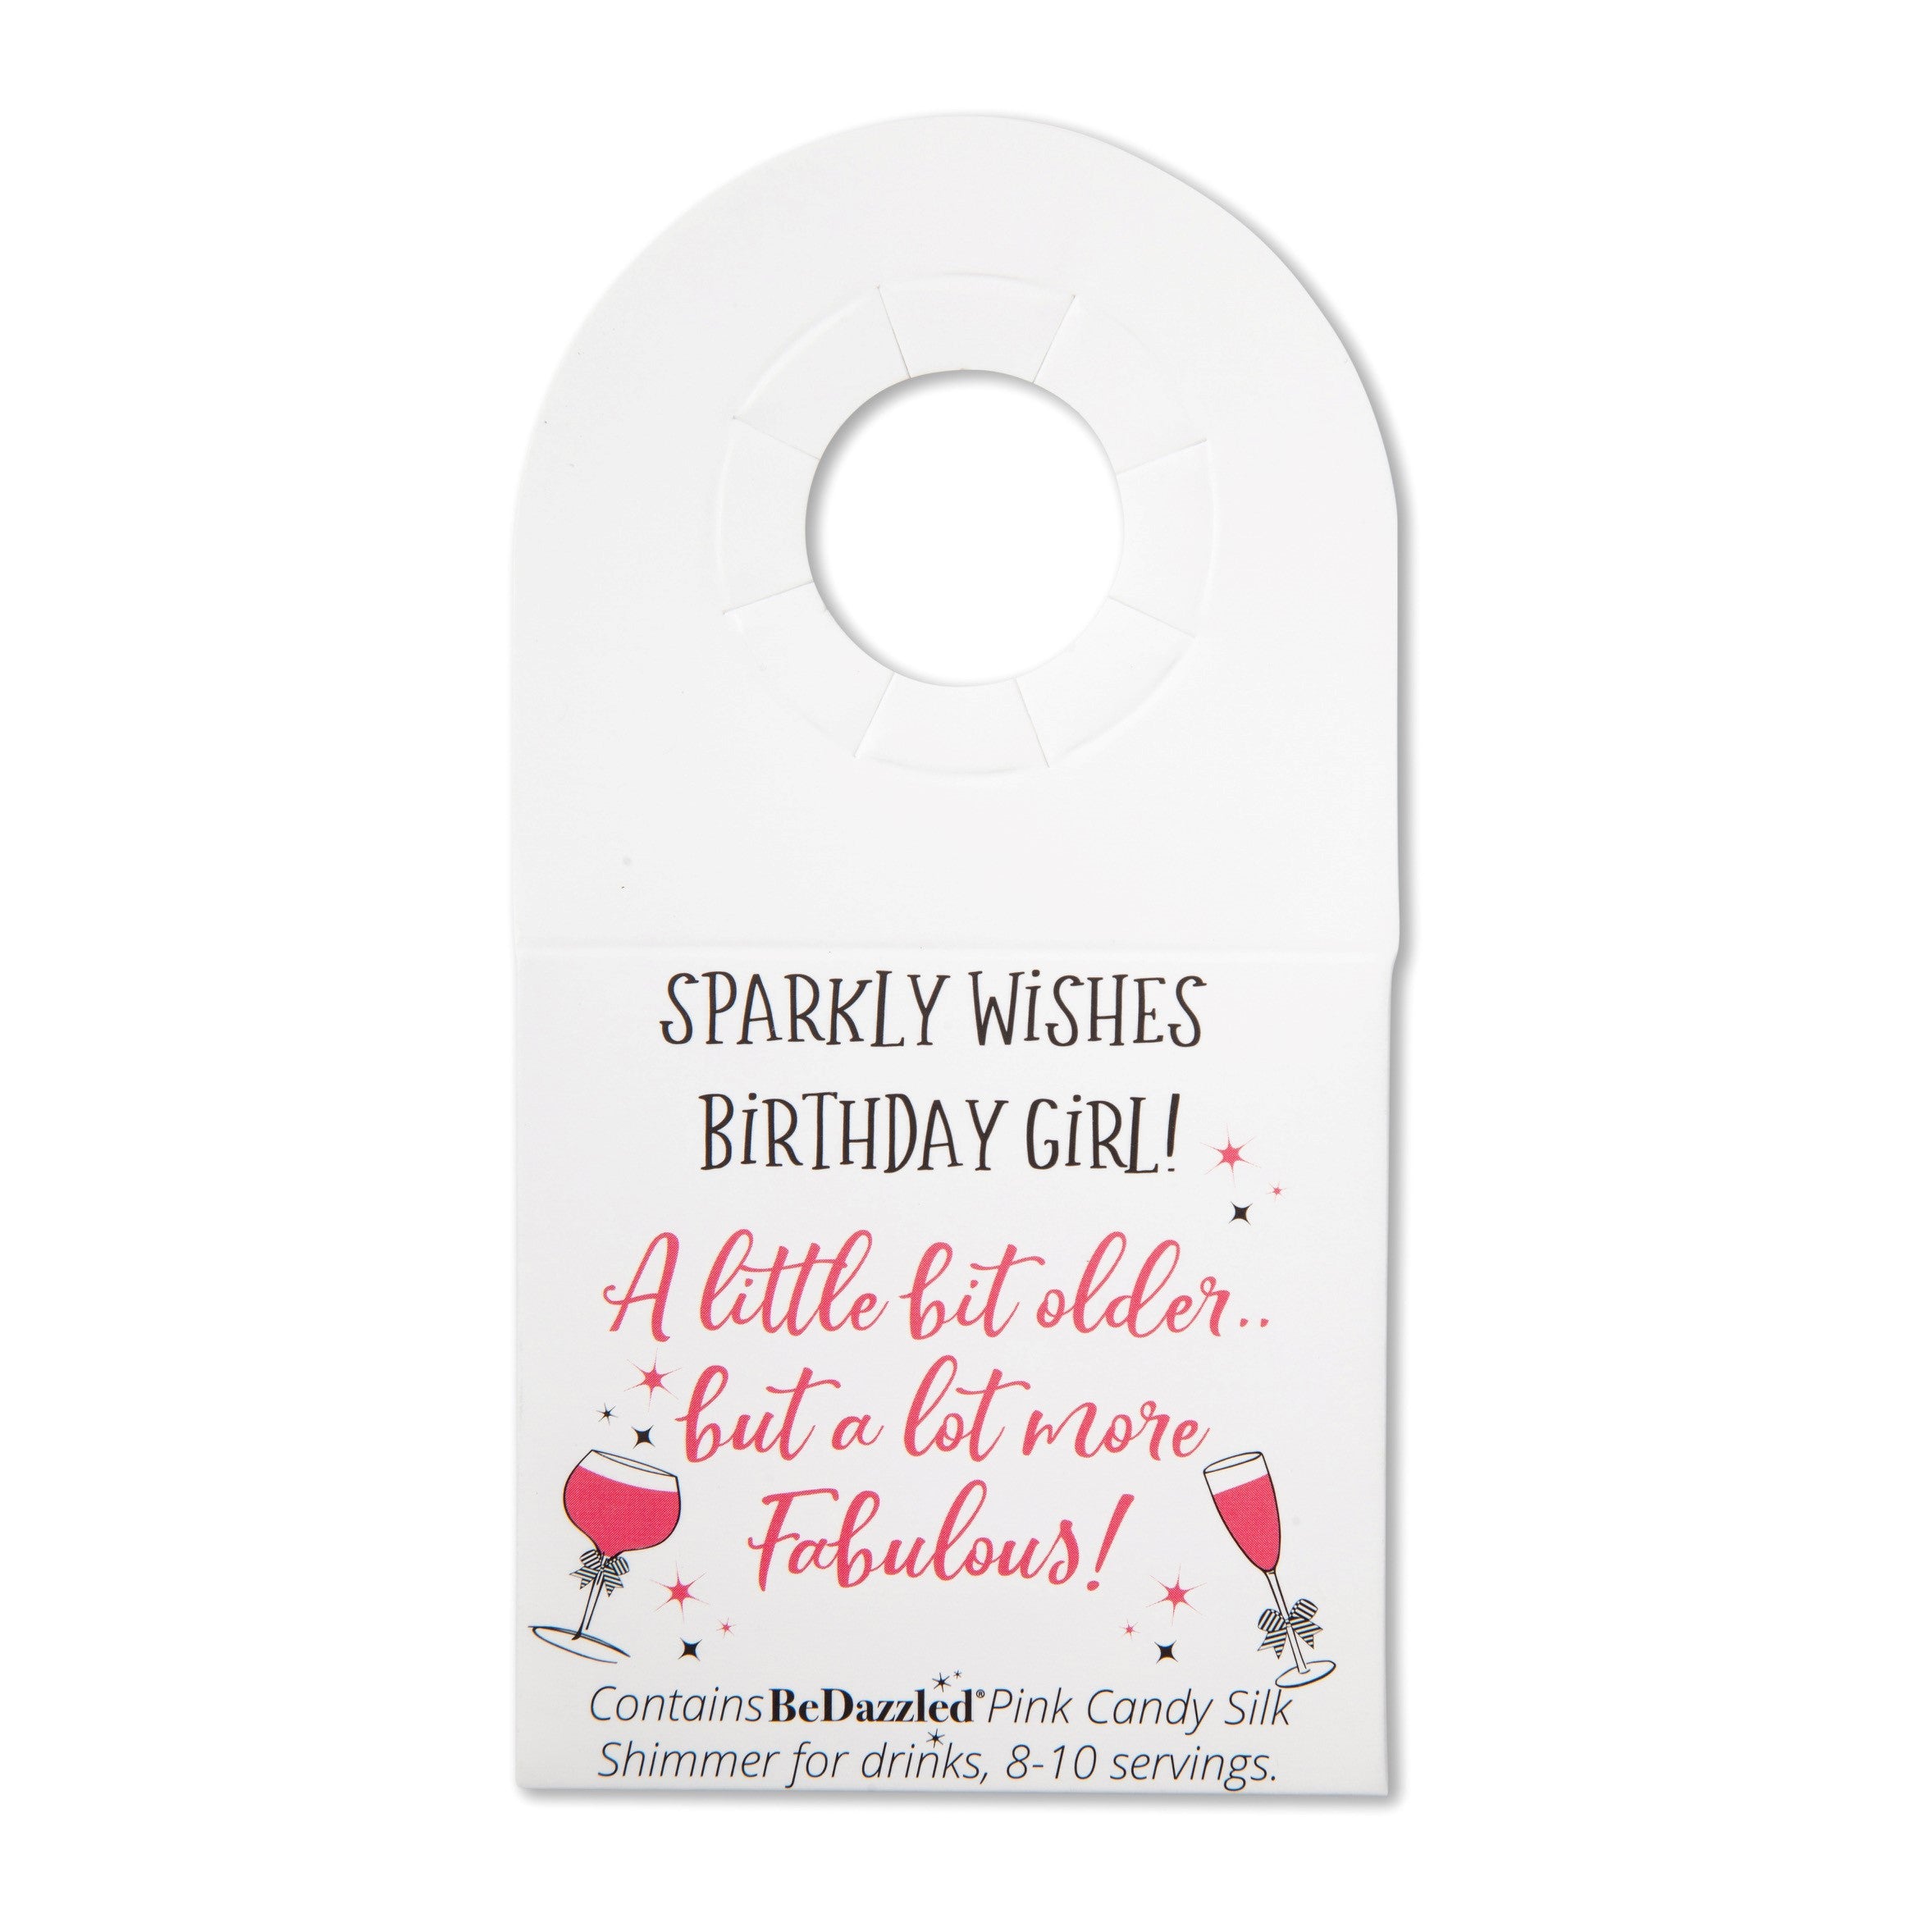 Sparkly Wishes Birthday Girl A little bit older- bottle neck gift tag PINK CANDY